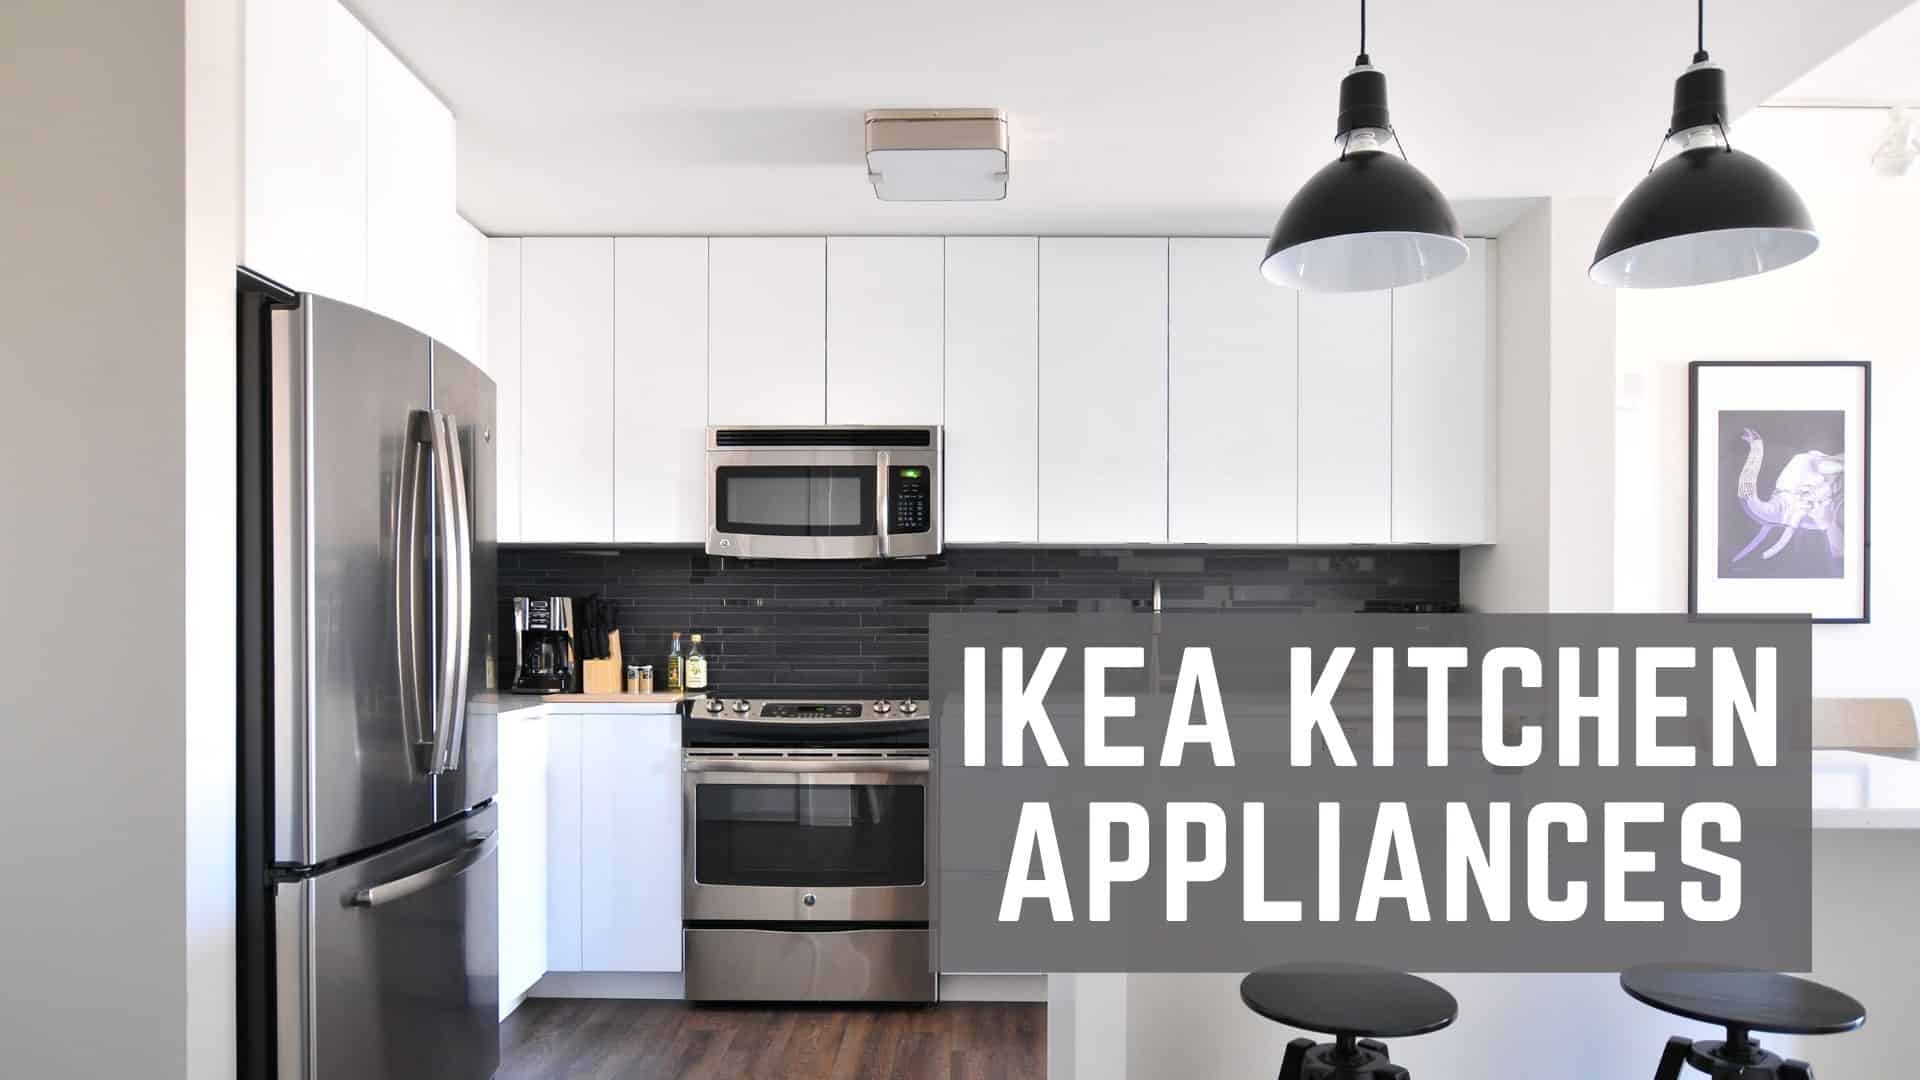 Absorberend Aquarium verdacht Why you should NOT buy IKEA kitchen appliances? - THE HOMESTUD